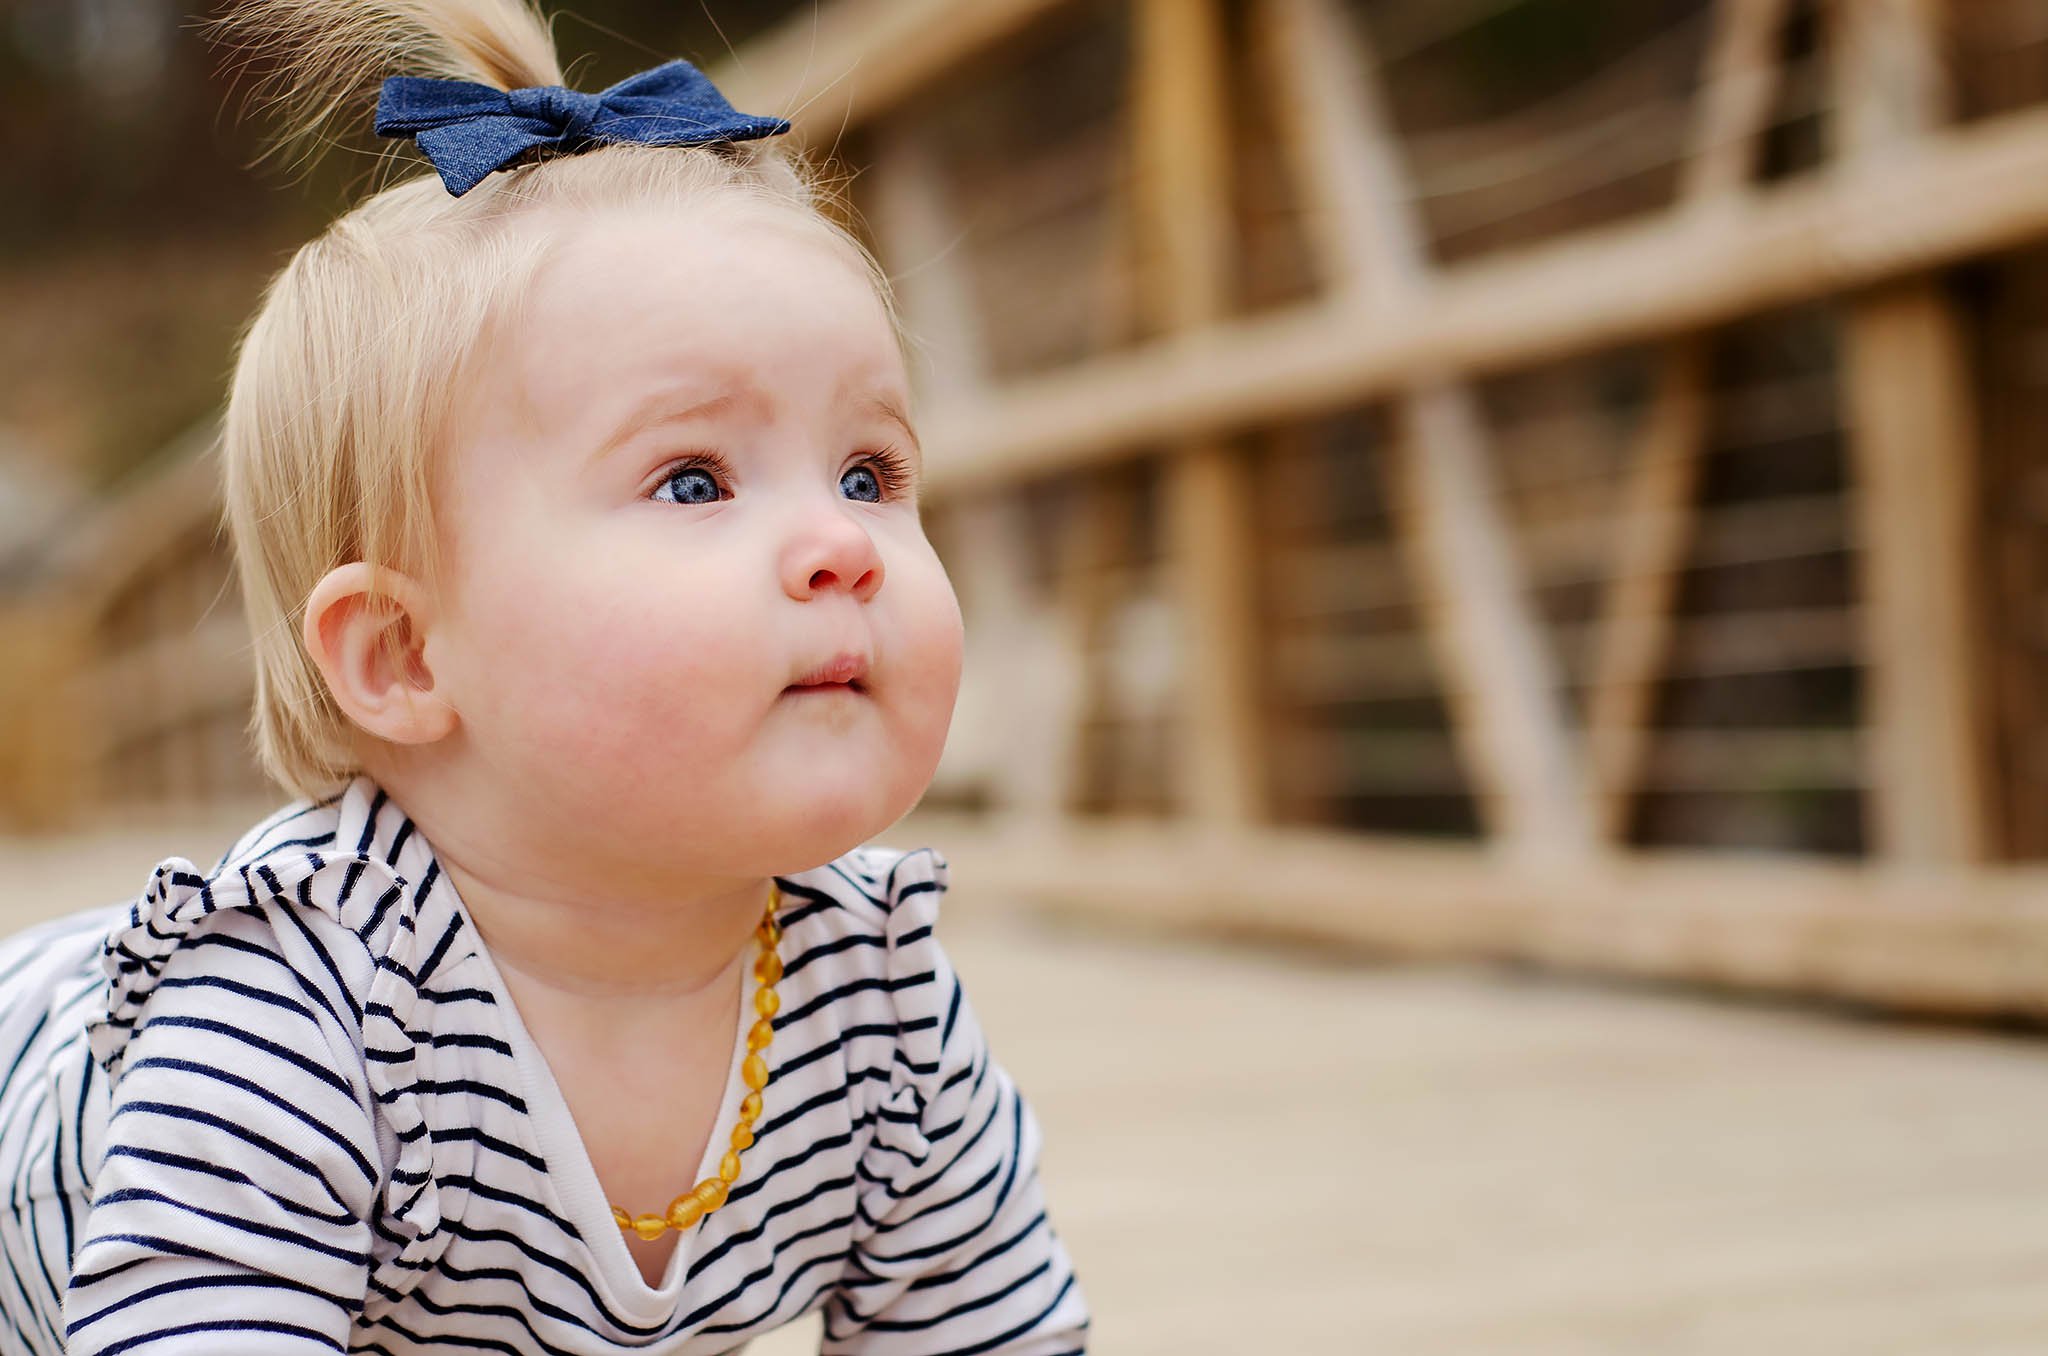 baby-wearing-striped-shirt-and-teething-necklace.jpg